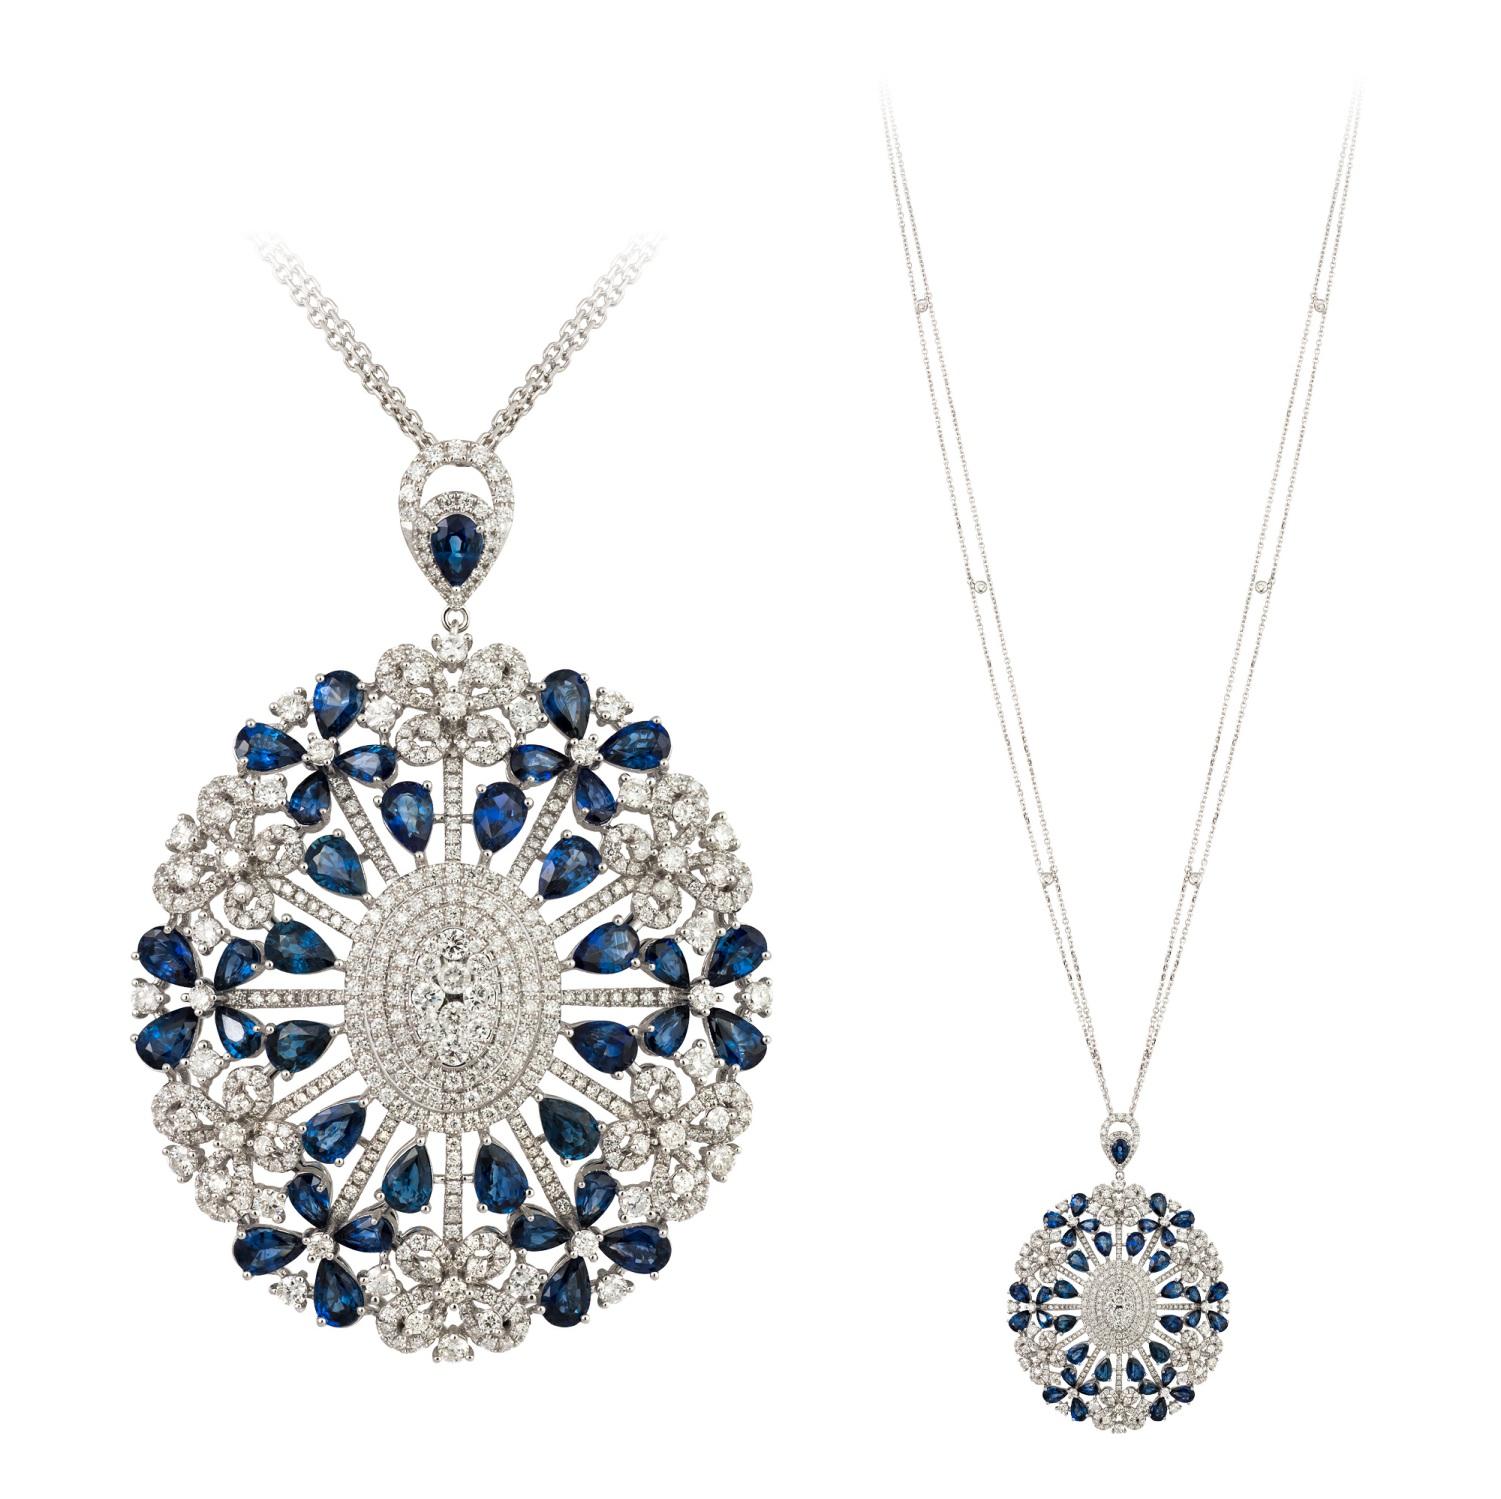 18K White Gold Diamond Necklace
Diamond : 5.07 Cts / 502 Pcs
Blue Sapphire : 14.45 Cts / 37 Pcs

Total Necklace Weight: 35,54 Grams
Necklace Length: 43 cm 


With a heritage of ancient fine Swiss jewelry traditions, NATKINA is a Geneva-based